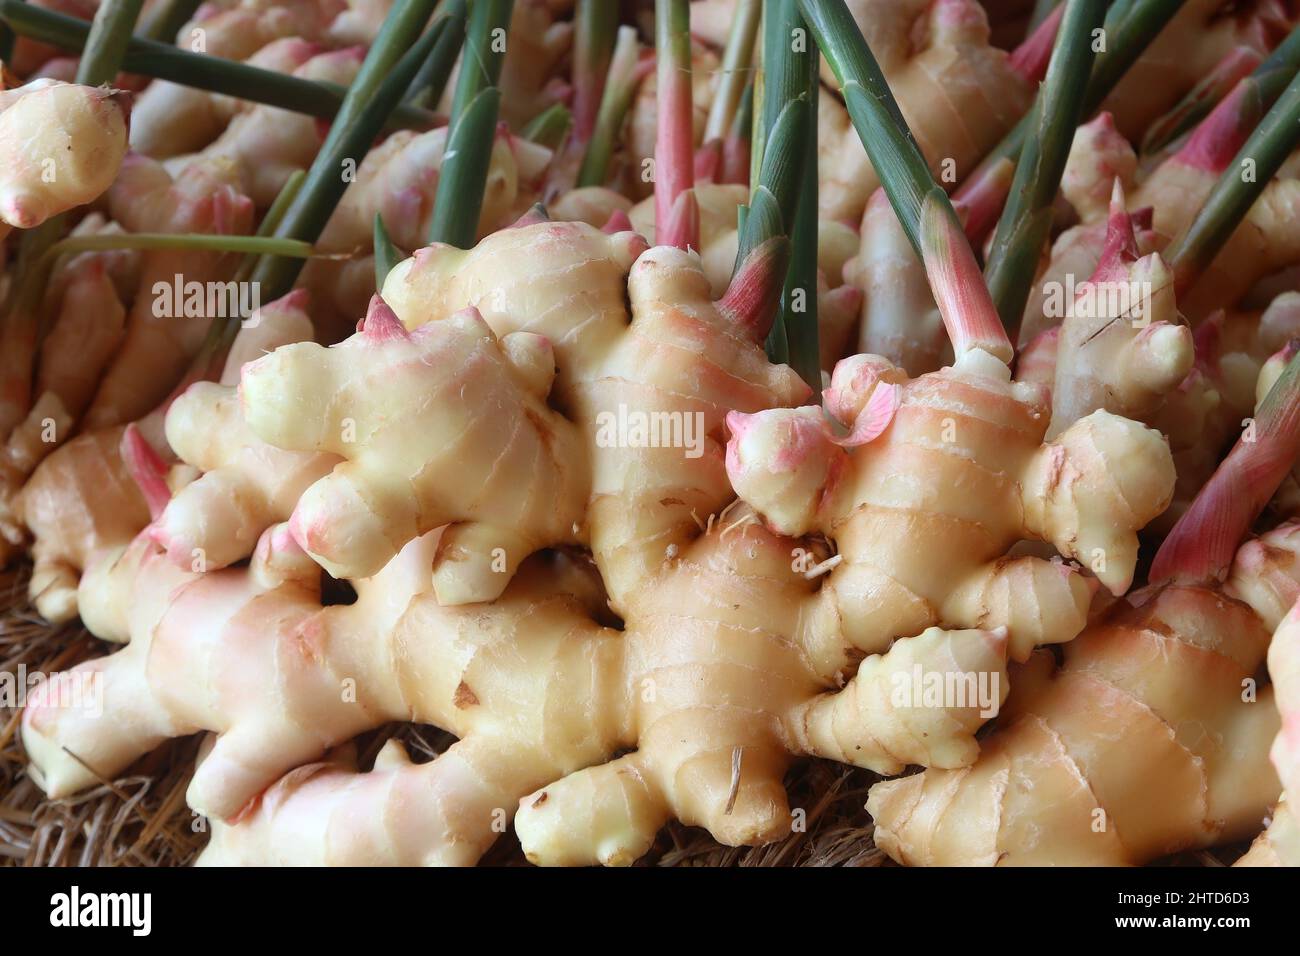 pile of ginger root at fruit market Stock Photo